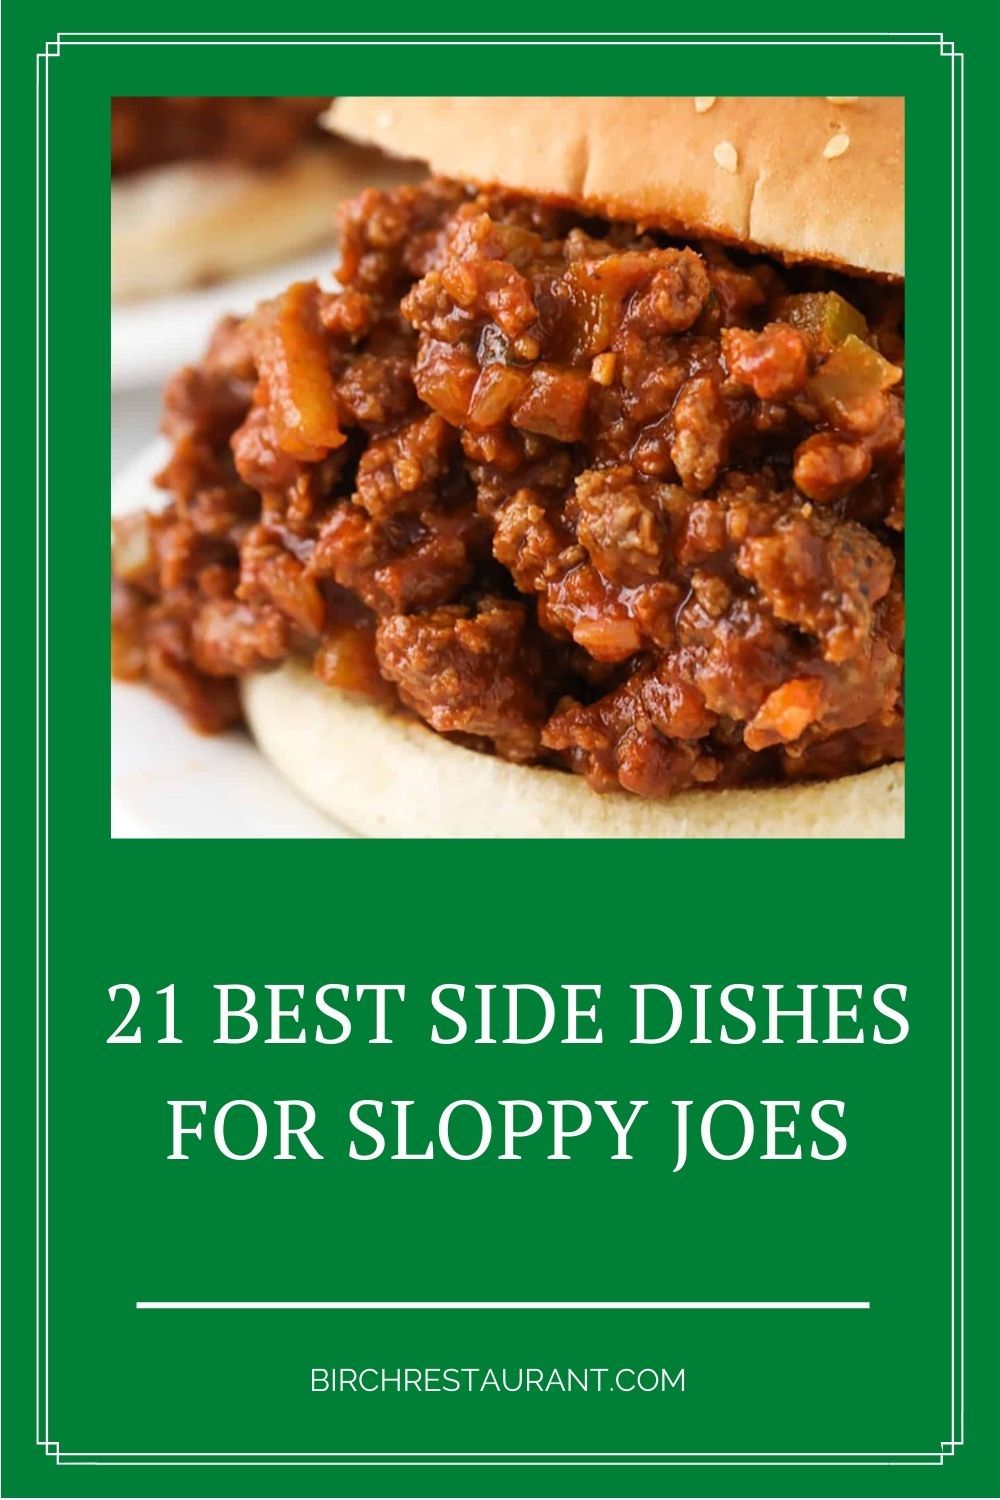 Best Side Dishes for Sloppy Joes